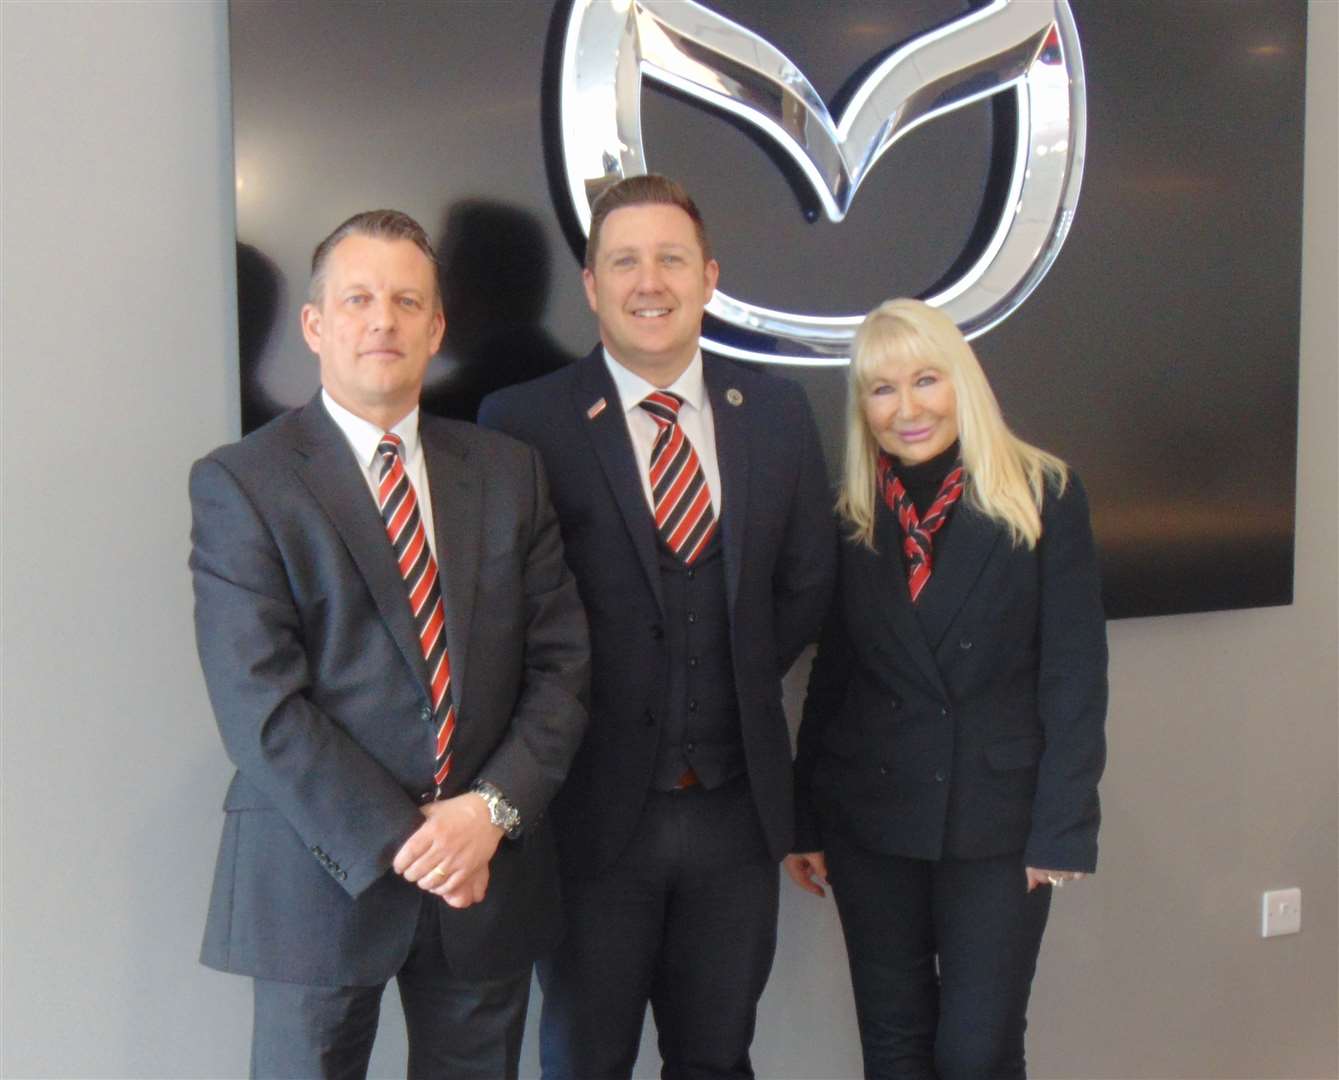 Denise Millard, executive director at Perrys, joined by Darren Ardron, Perrys MD, left, and Michael Latham, general manager, Perrys Mazda Canterbury (10962683)